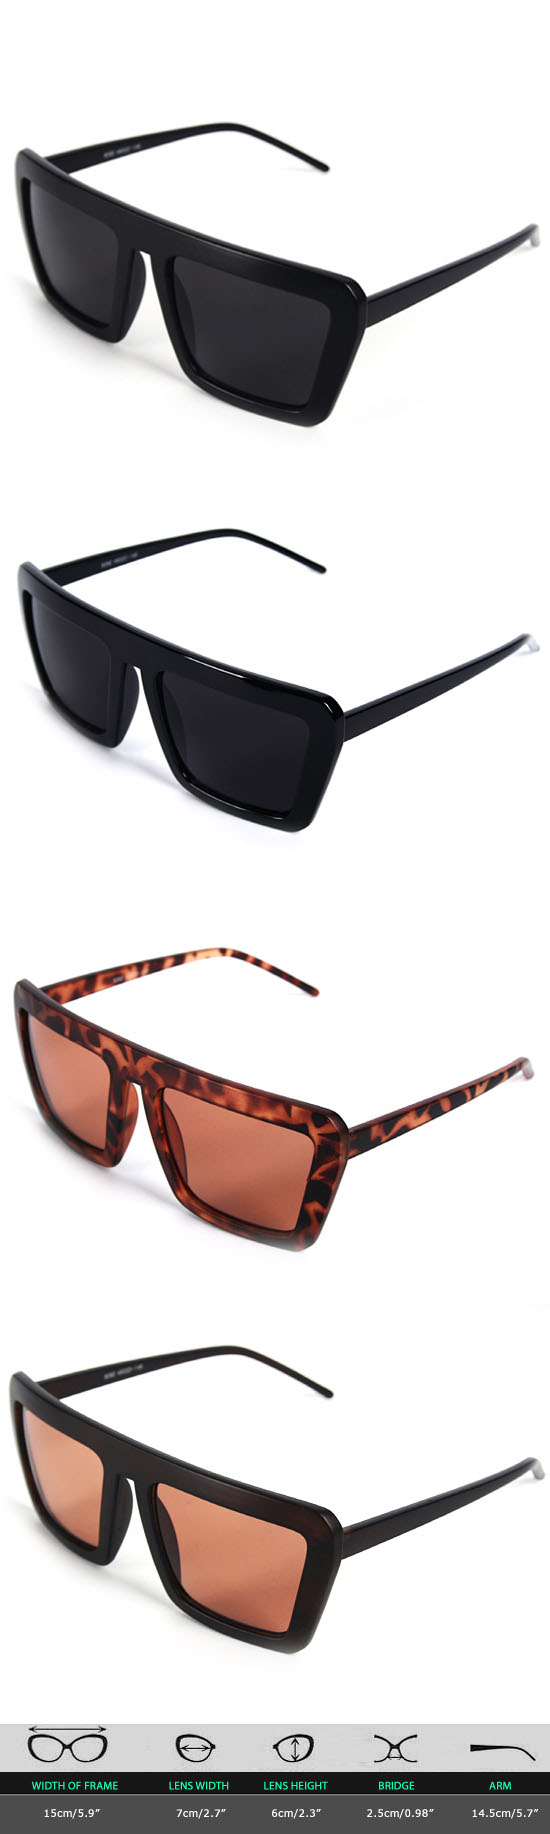 Accessories :: Sunglasses & Glasses :: Strong Bold Cyber Retro Frame ...